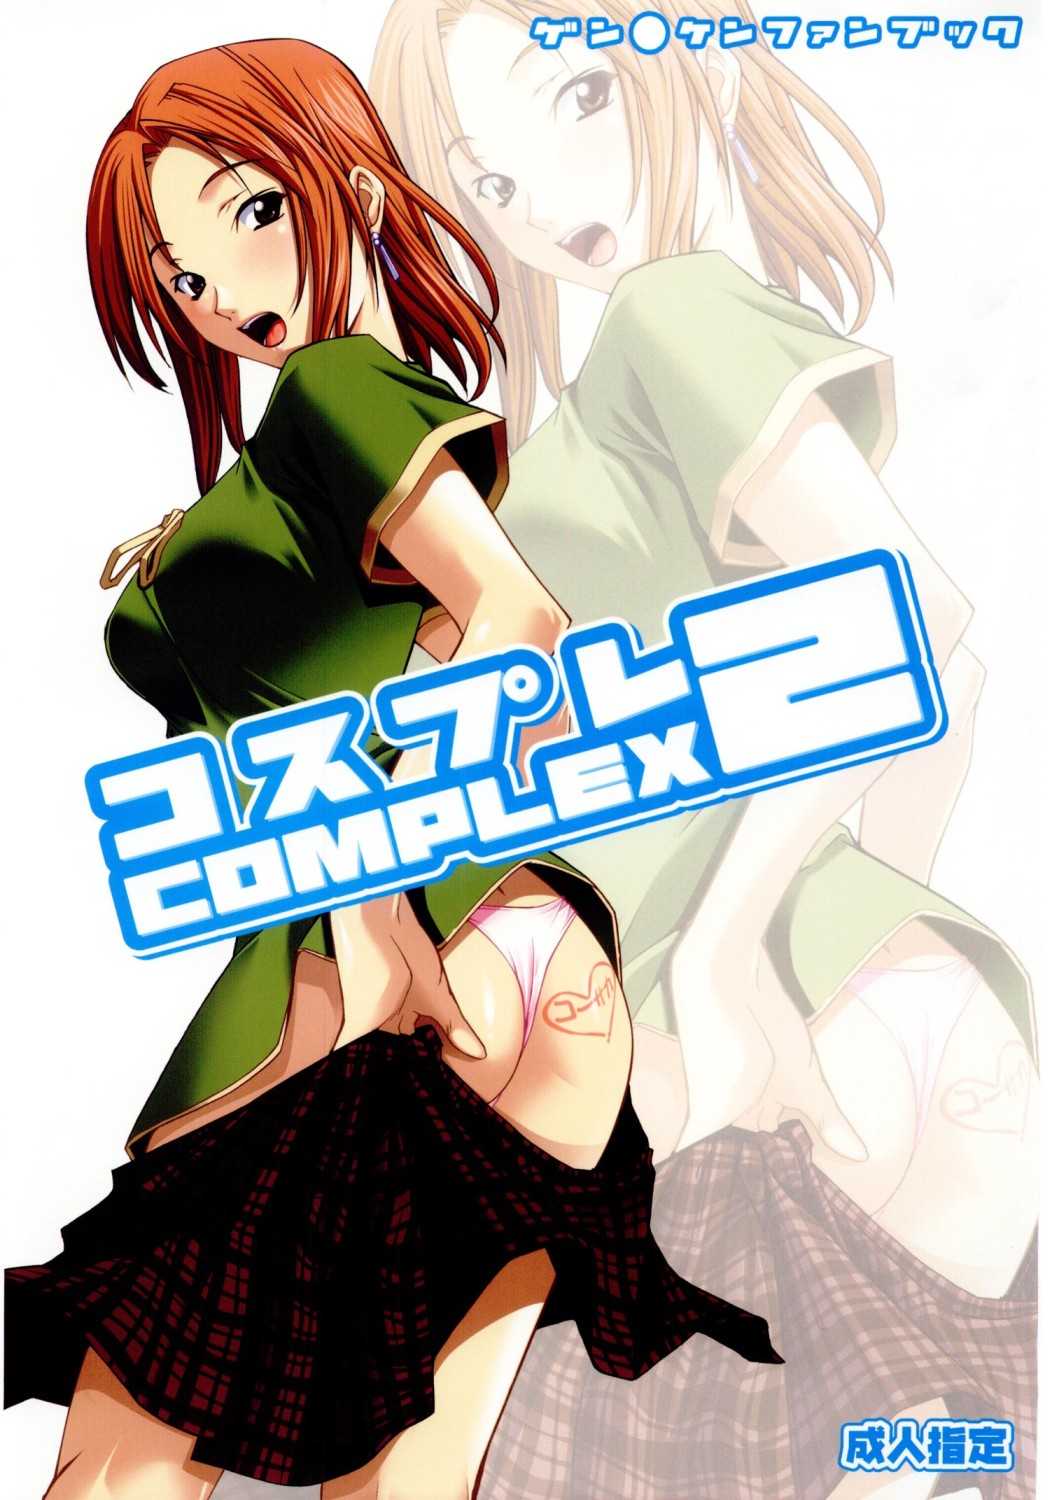 [P.FOREST] Cosplay COMPLEX 2 (Genshiken) [P.FOREST] コスプレCOMPLEX 2 (げんしけん)